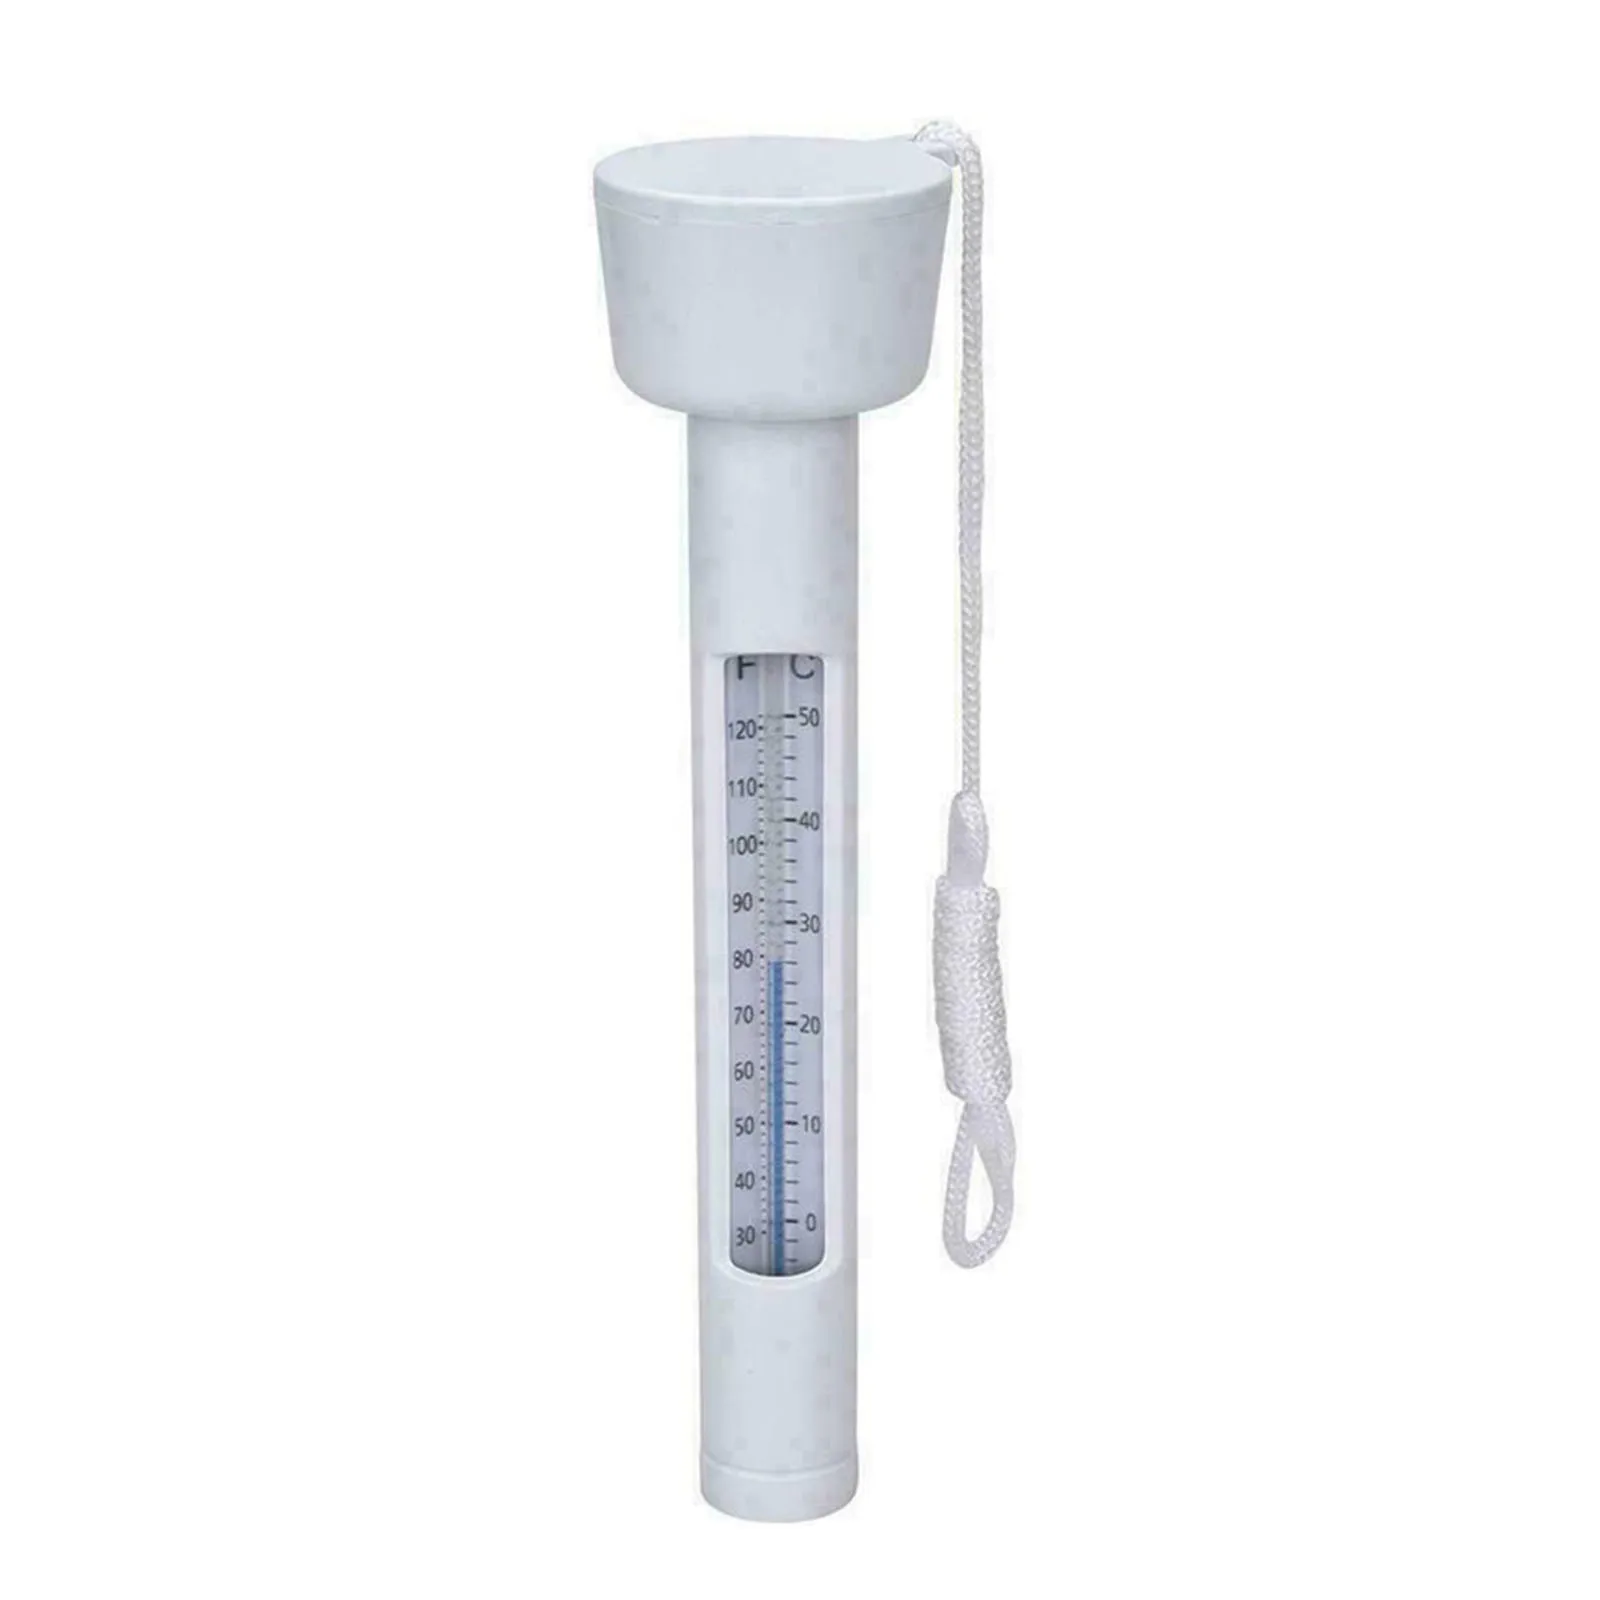 

Temperature Tester Thermometer Floating Thermometer Gauge Tester Meter Floating Swimming Pool Water Temp Practical